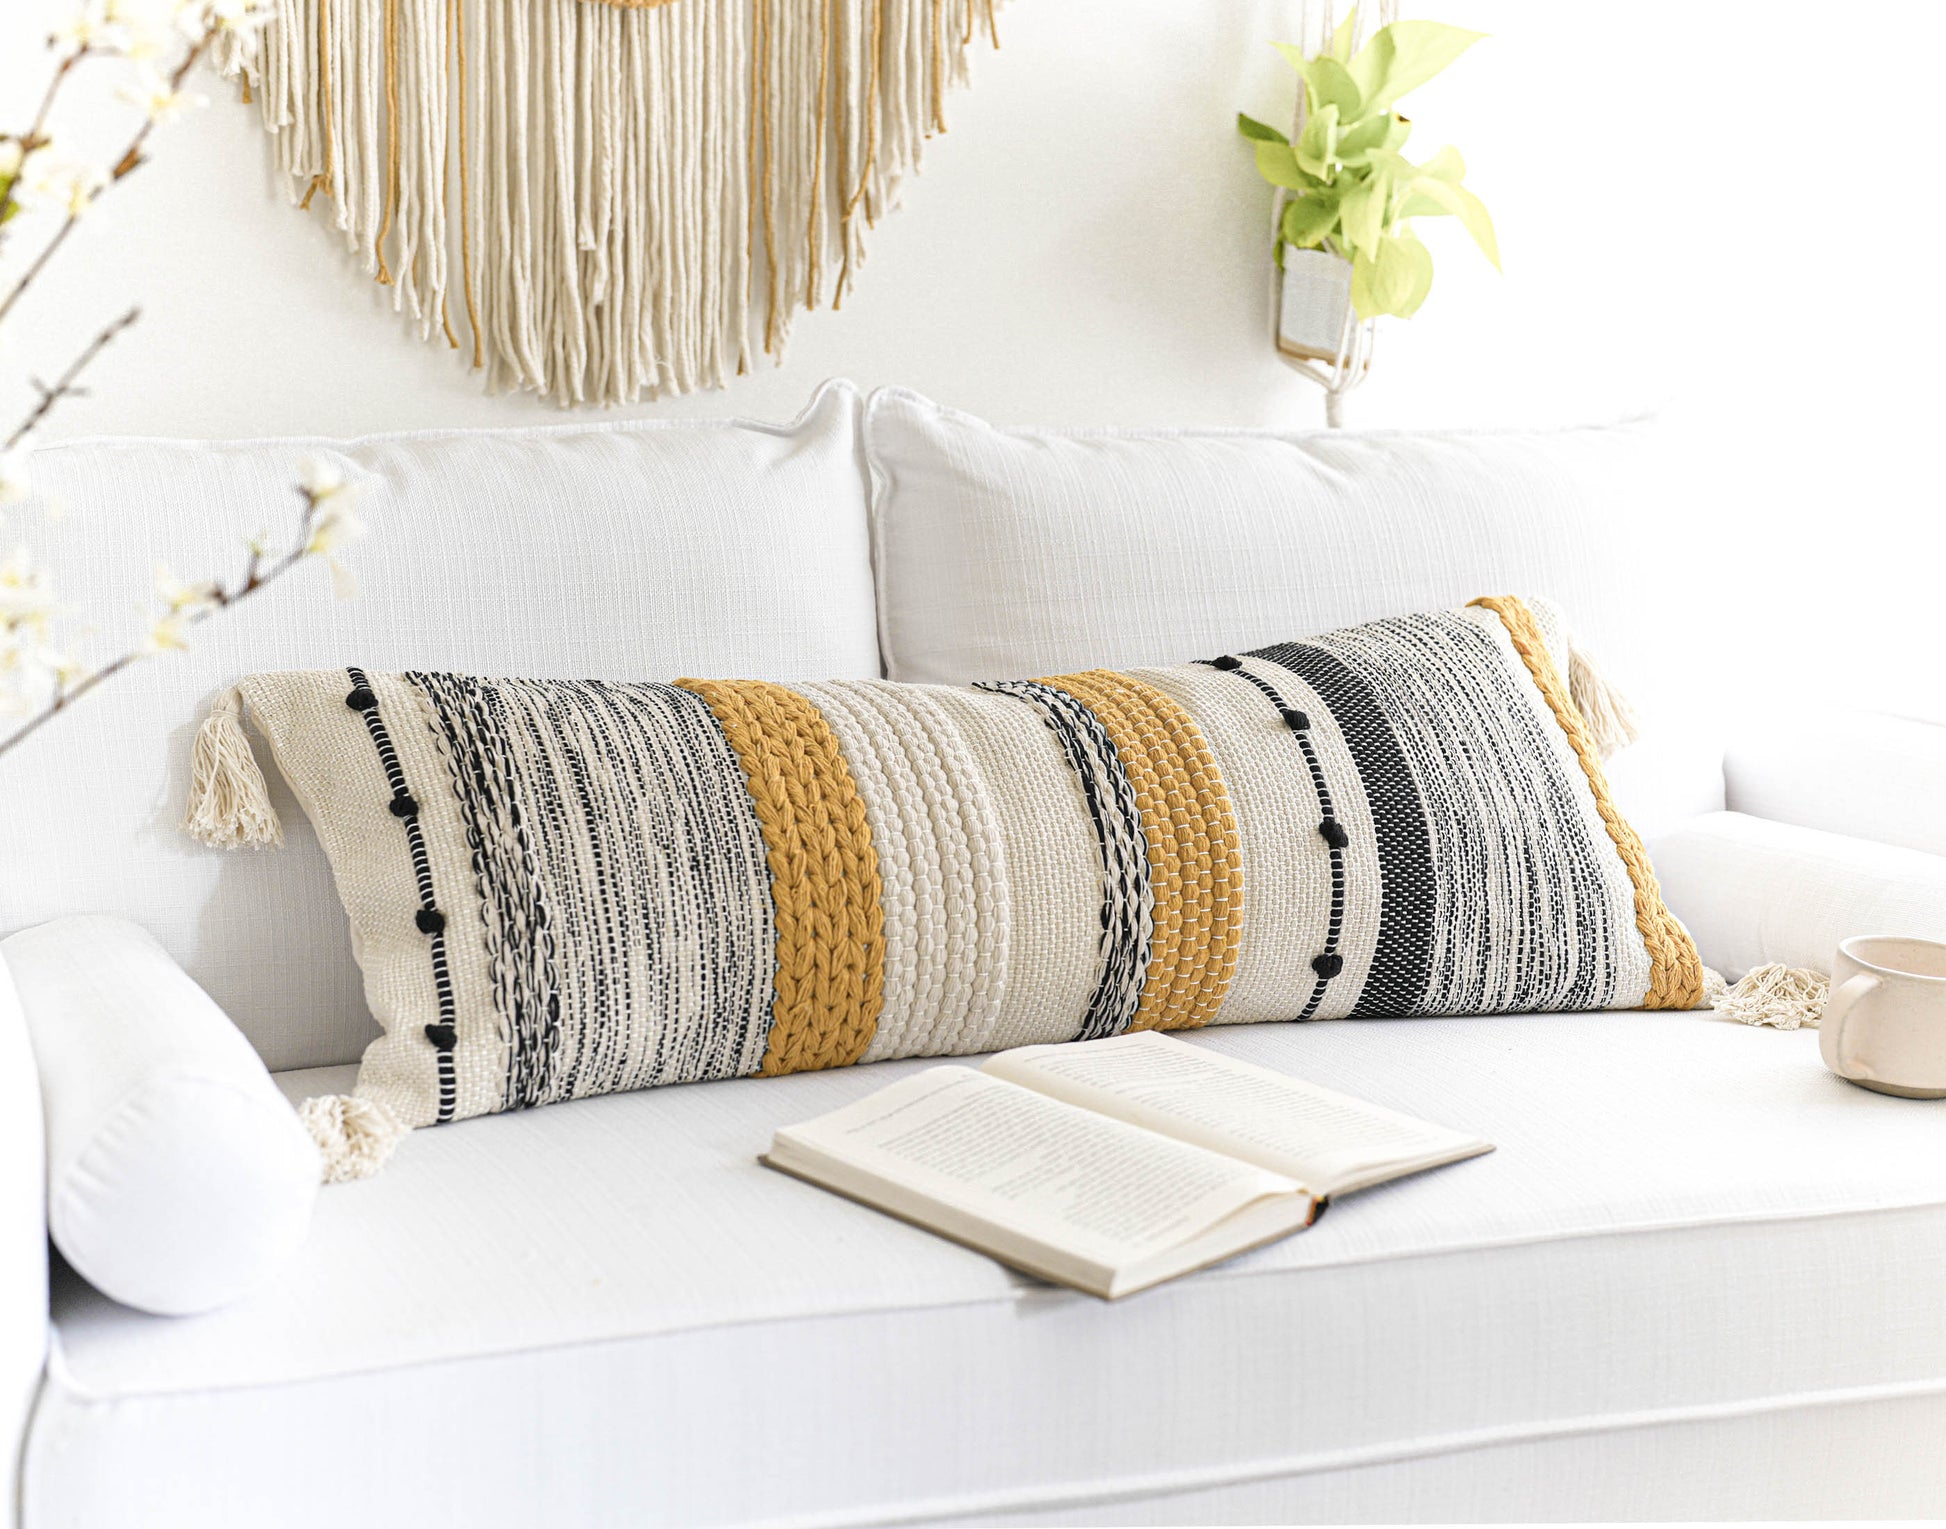  BlissBlush Extra Long Pillow Cover for Bed 12x46 Boho